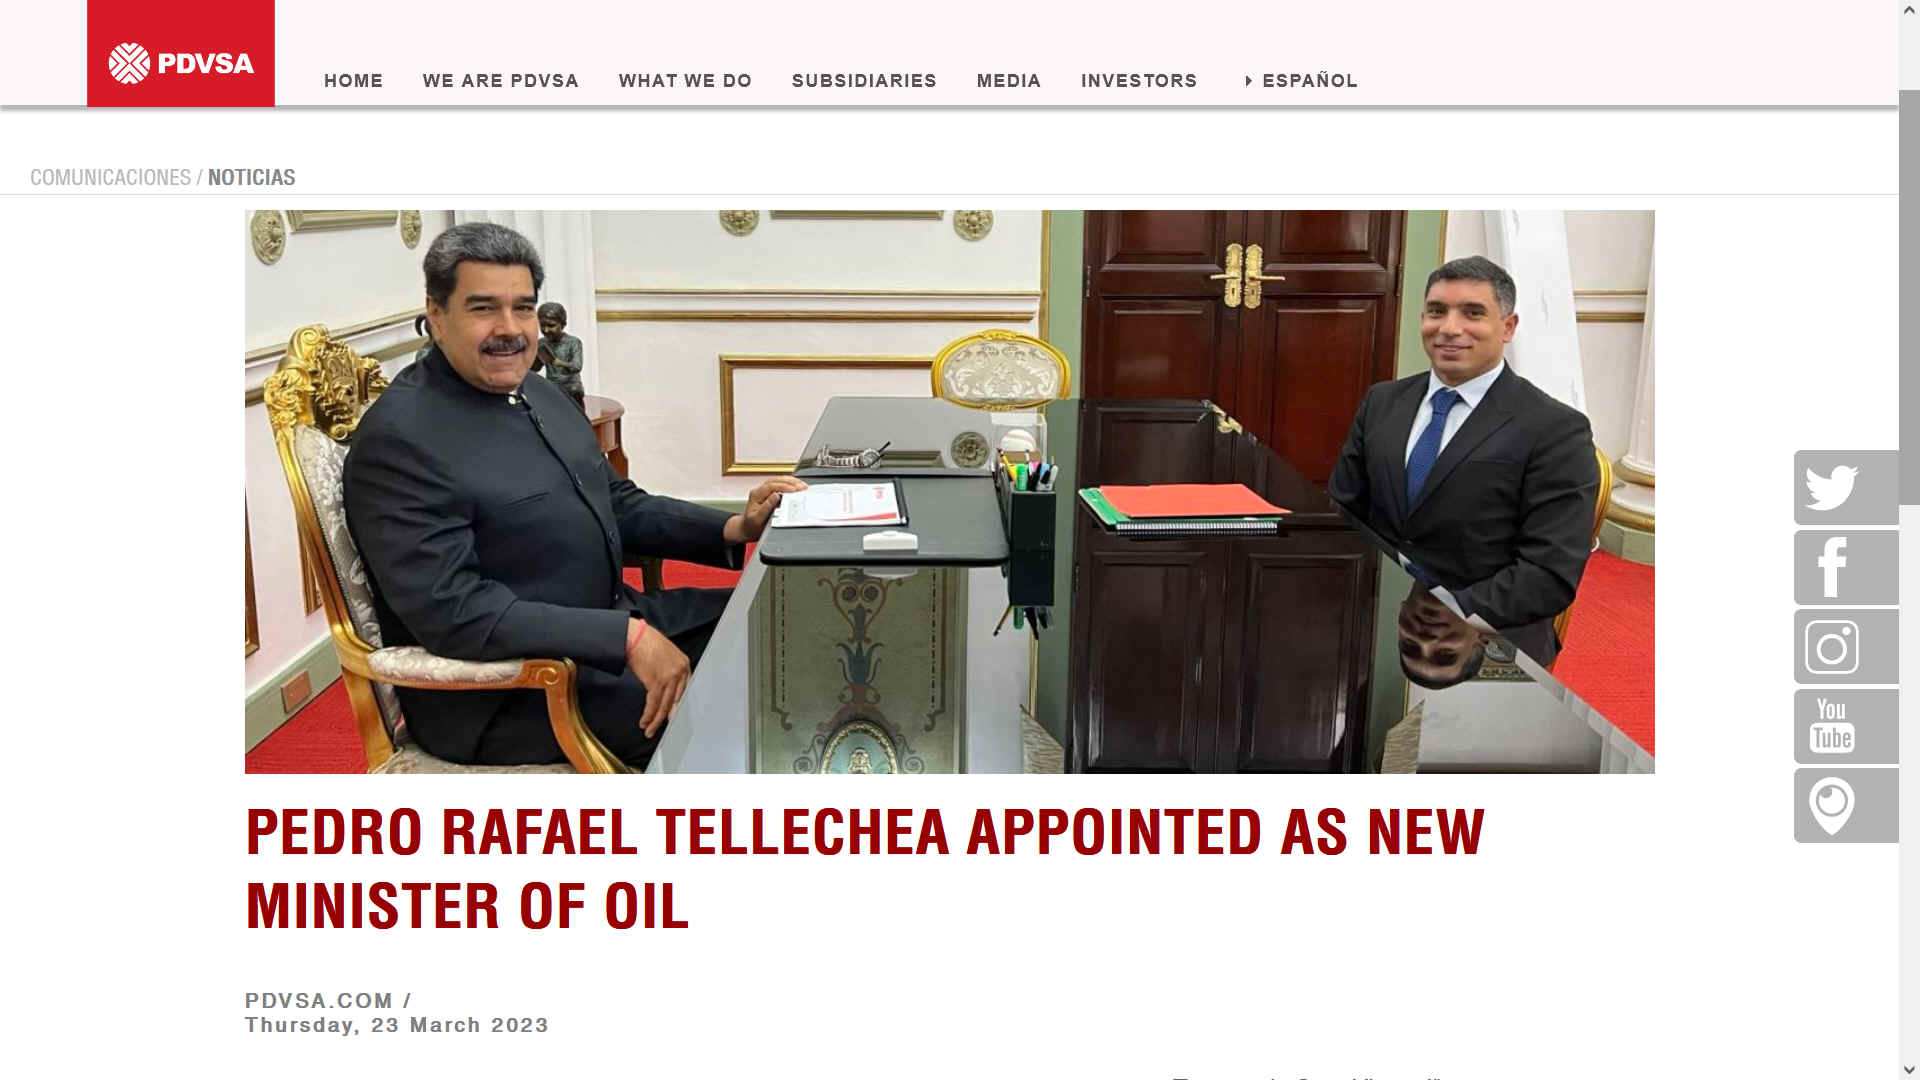 The president of the Bolivarian Republic of Venezuela, Nicols Maduro Moros, announced on Tuesday night the appointment of Pedro Rafael Tellechea, as the new Minister of Oil. Through a message on his social network Twitter @NicolasMaduro, the President announced the information. "I met with the president of PDVSA, Engineer Pedro Tellechea, I appointed him as the new minister of Oil, in the transformation process that the industry is going through. Maximum Efficiency Companion!" said Maduro. In response to this appointment, Tellechea tweeted @tellechearuiz: "I count on my best efforts and full commitment to continue contributing to the economic and social development of our Homeland, with his leadership together with the entire government team. Teamwork, Sure Victory!". The young mechanical engineer with a specialty in public finance has assumed responsibilities in various state enterprises since the reactivation of the state reducer Industria Venezolana del Aluminio C.A., CVG Venalum, in Guyana; passing through the Petrochemical area in Pequiven S.A., and since 6 January assumed the reins of Petrleos de Venezuela S.A., (PDVSA). Also, the new Minister of Petroleum played a fundamental role in the recovery of Monomeros Colombo Venezolano S.A., a subsidiary of Pequiven in Colombia, in which it established a new board of directors in September 2022, promoting its production processes for the benefit of Colombian farmers.